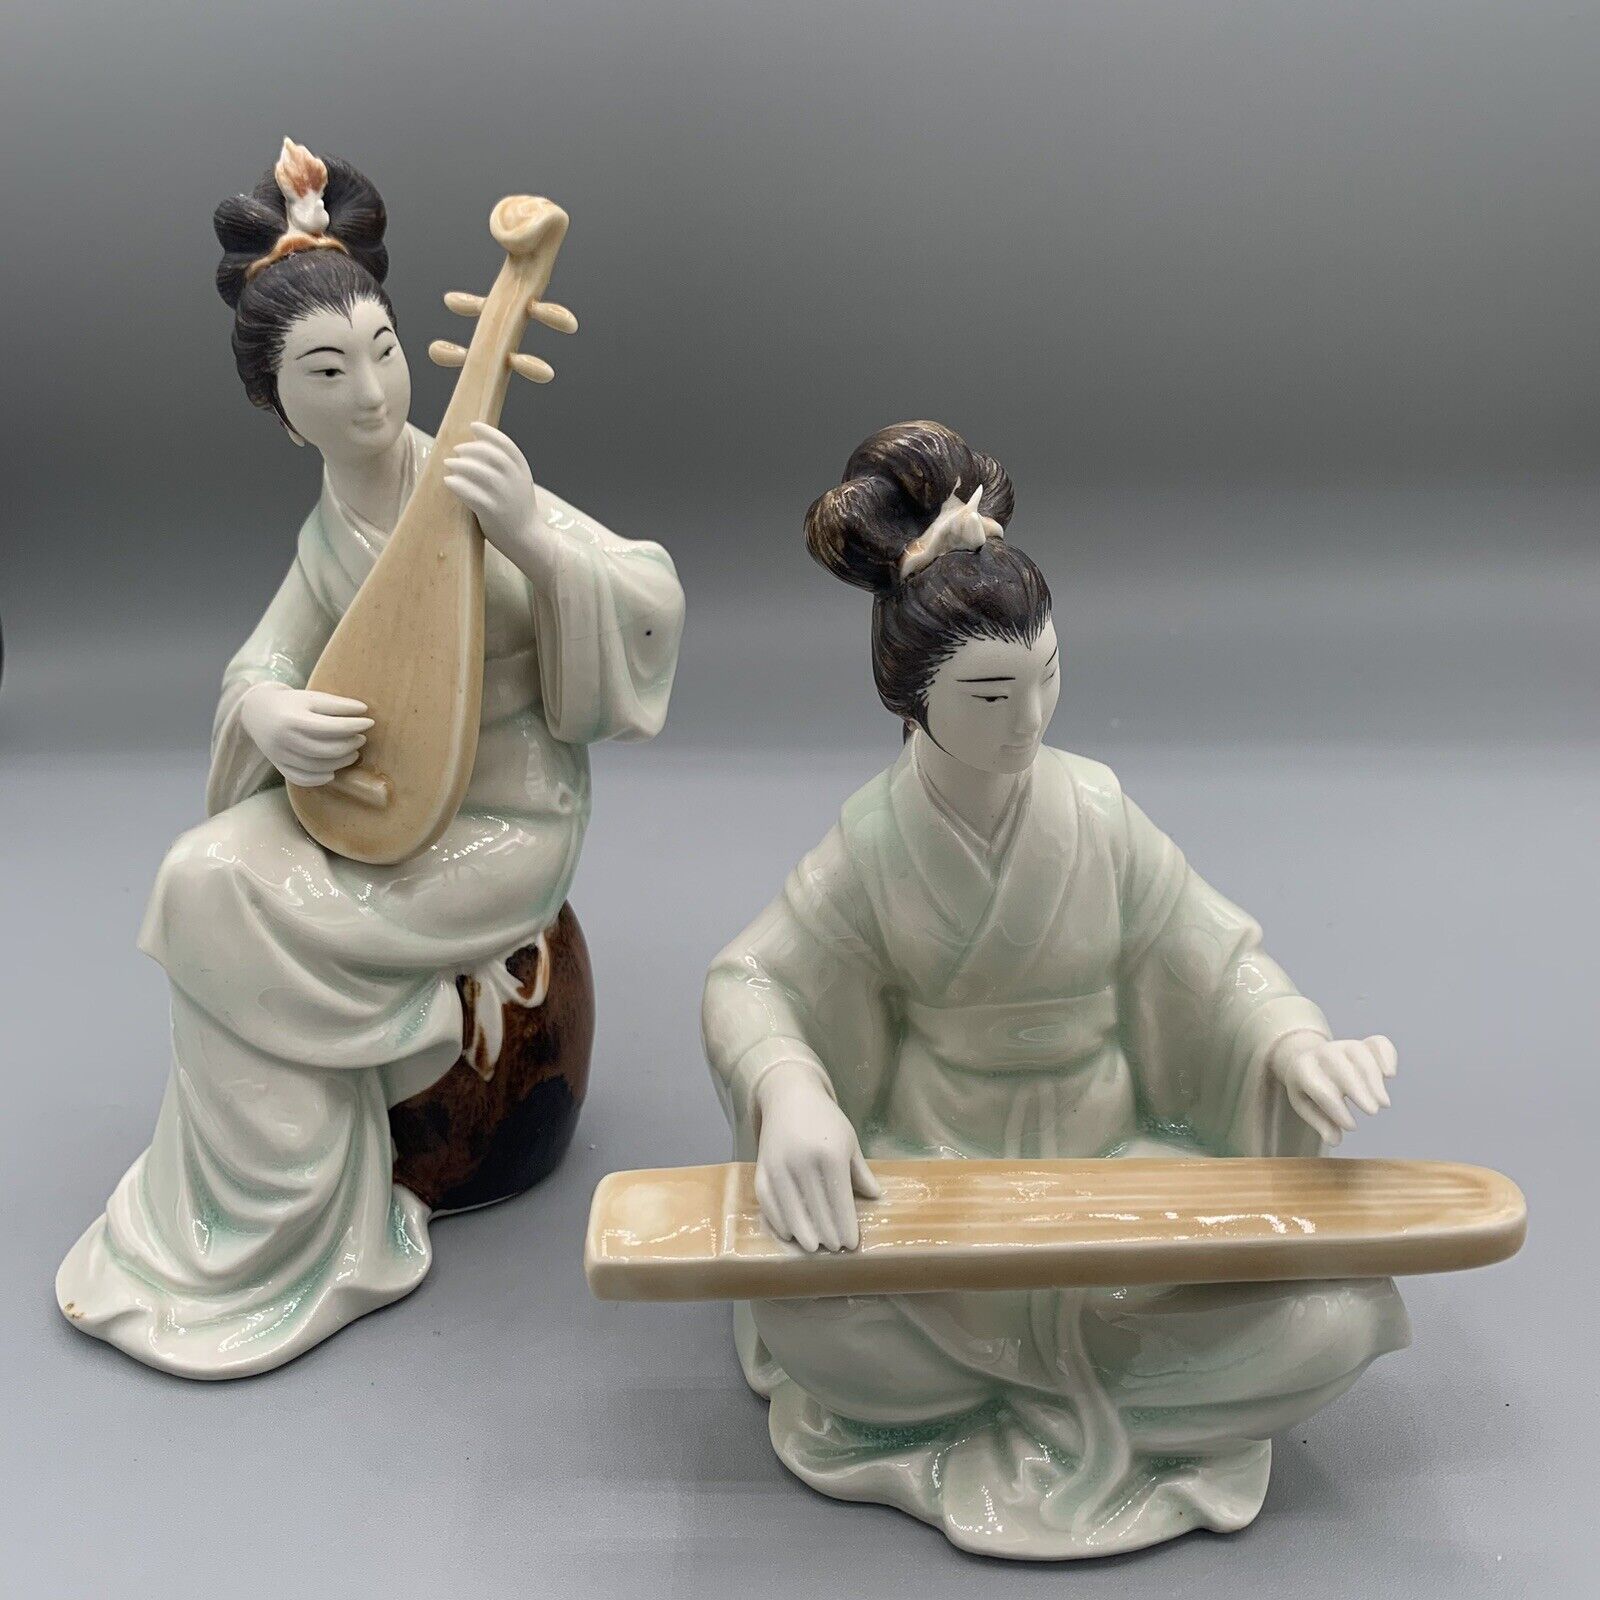 2 Chinese Celadon Porcelain Figurines Women Playing Pluck Pipa Qin Zither VTG